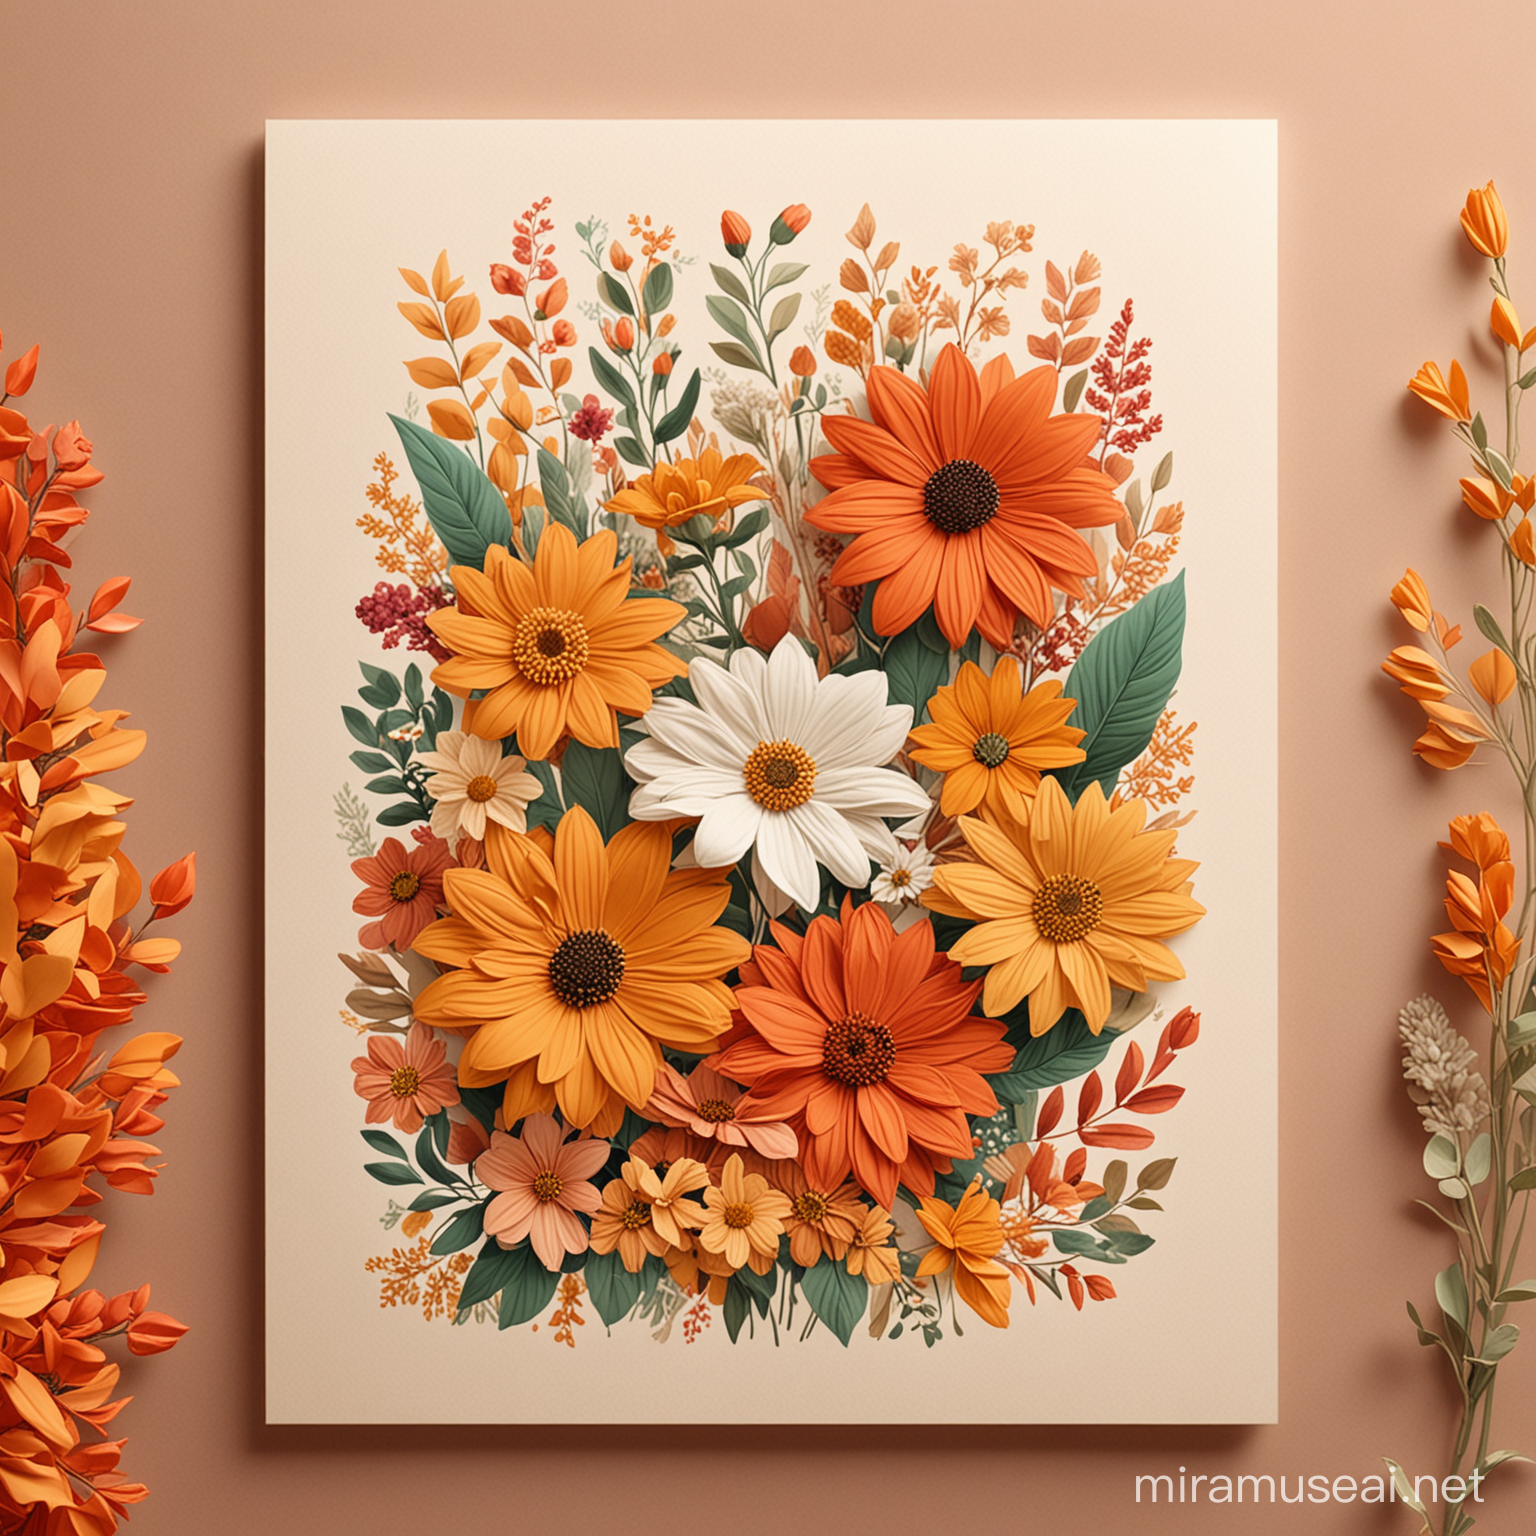 Handmade Lebanon Style Illustration with WarmColored Flowers